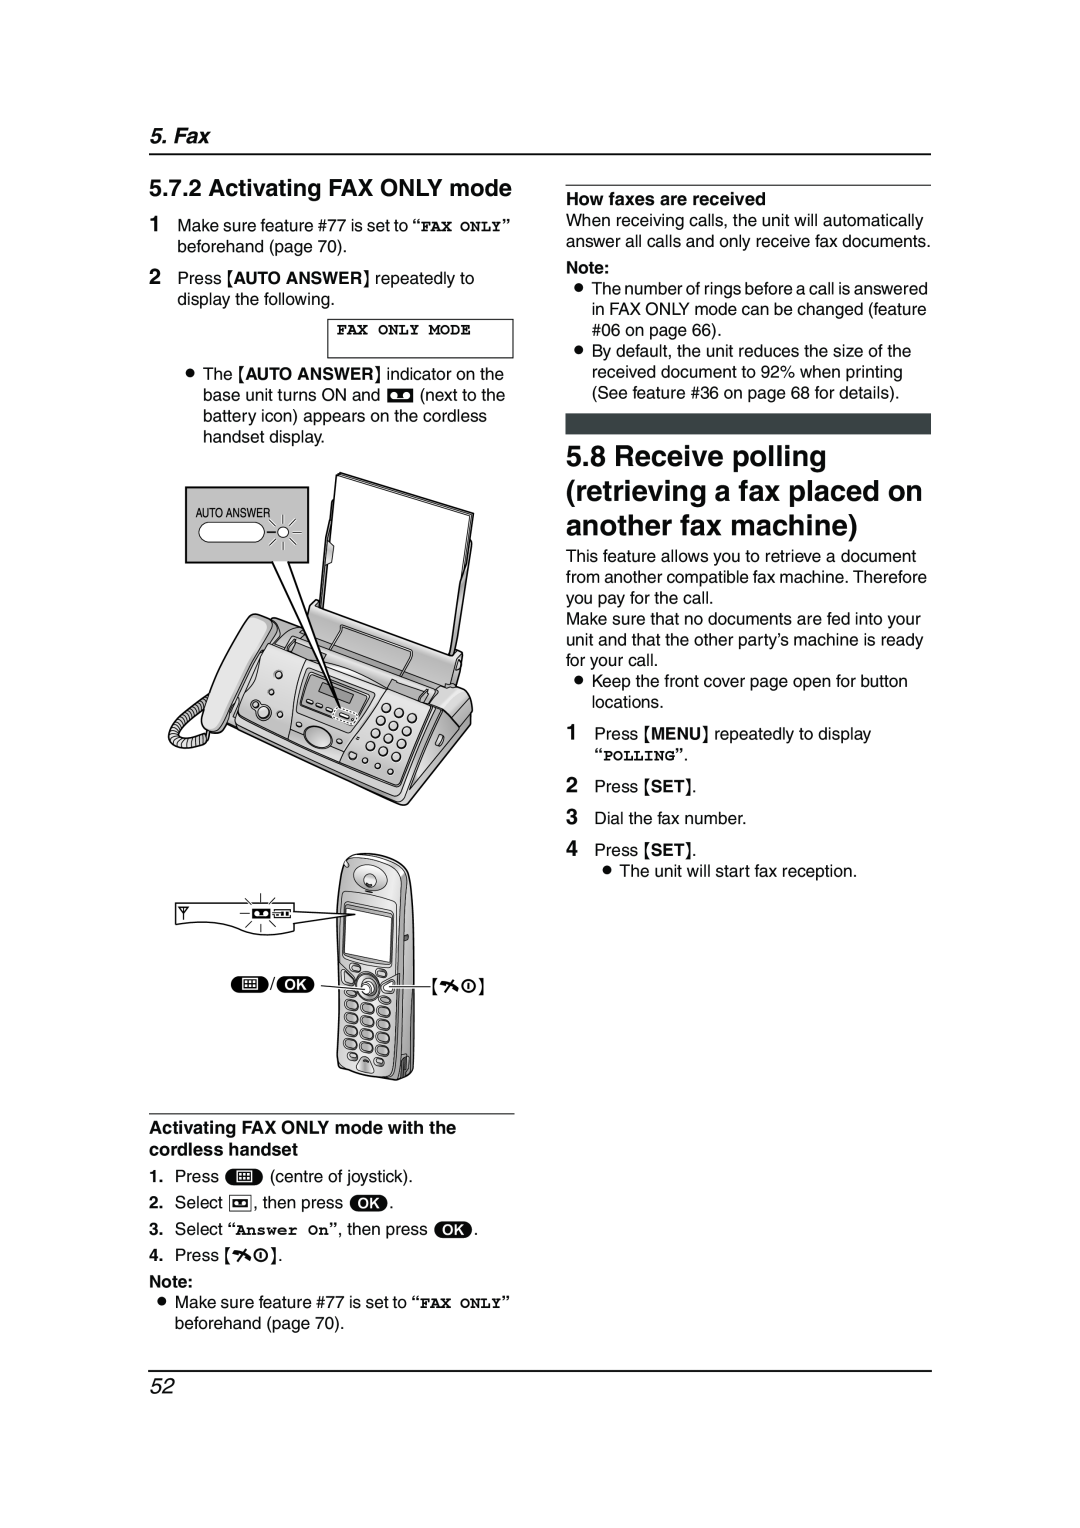 Panasonic KX-FC241AL manual Receive polling retrieving a fax placed on another fax machine, Activating FAX ONLY mode, Fax 